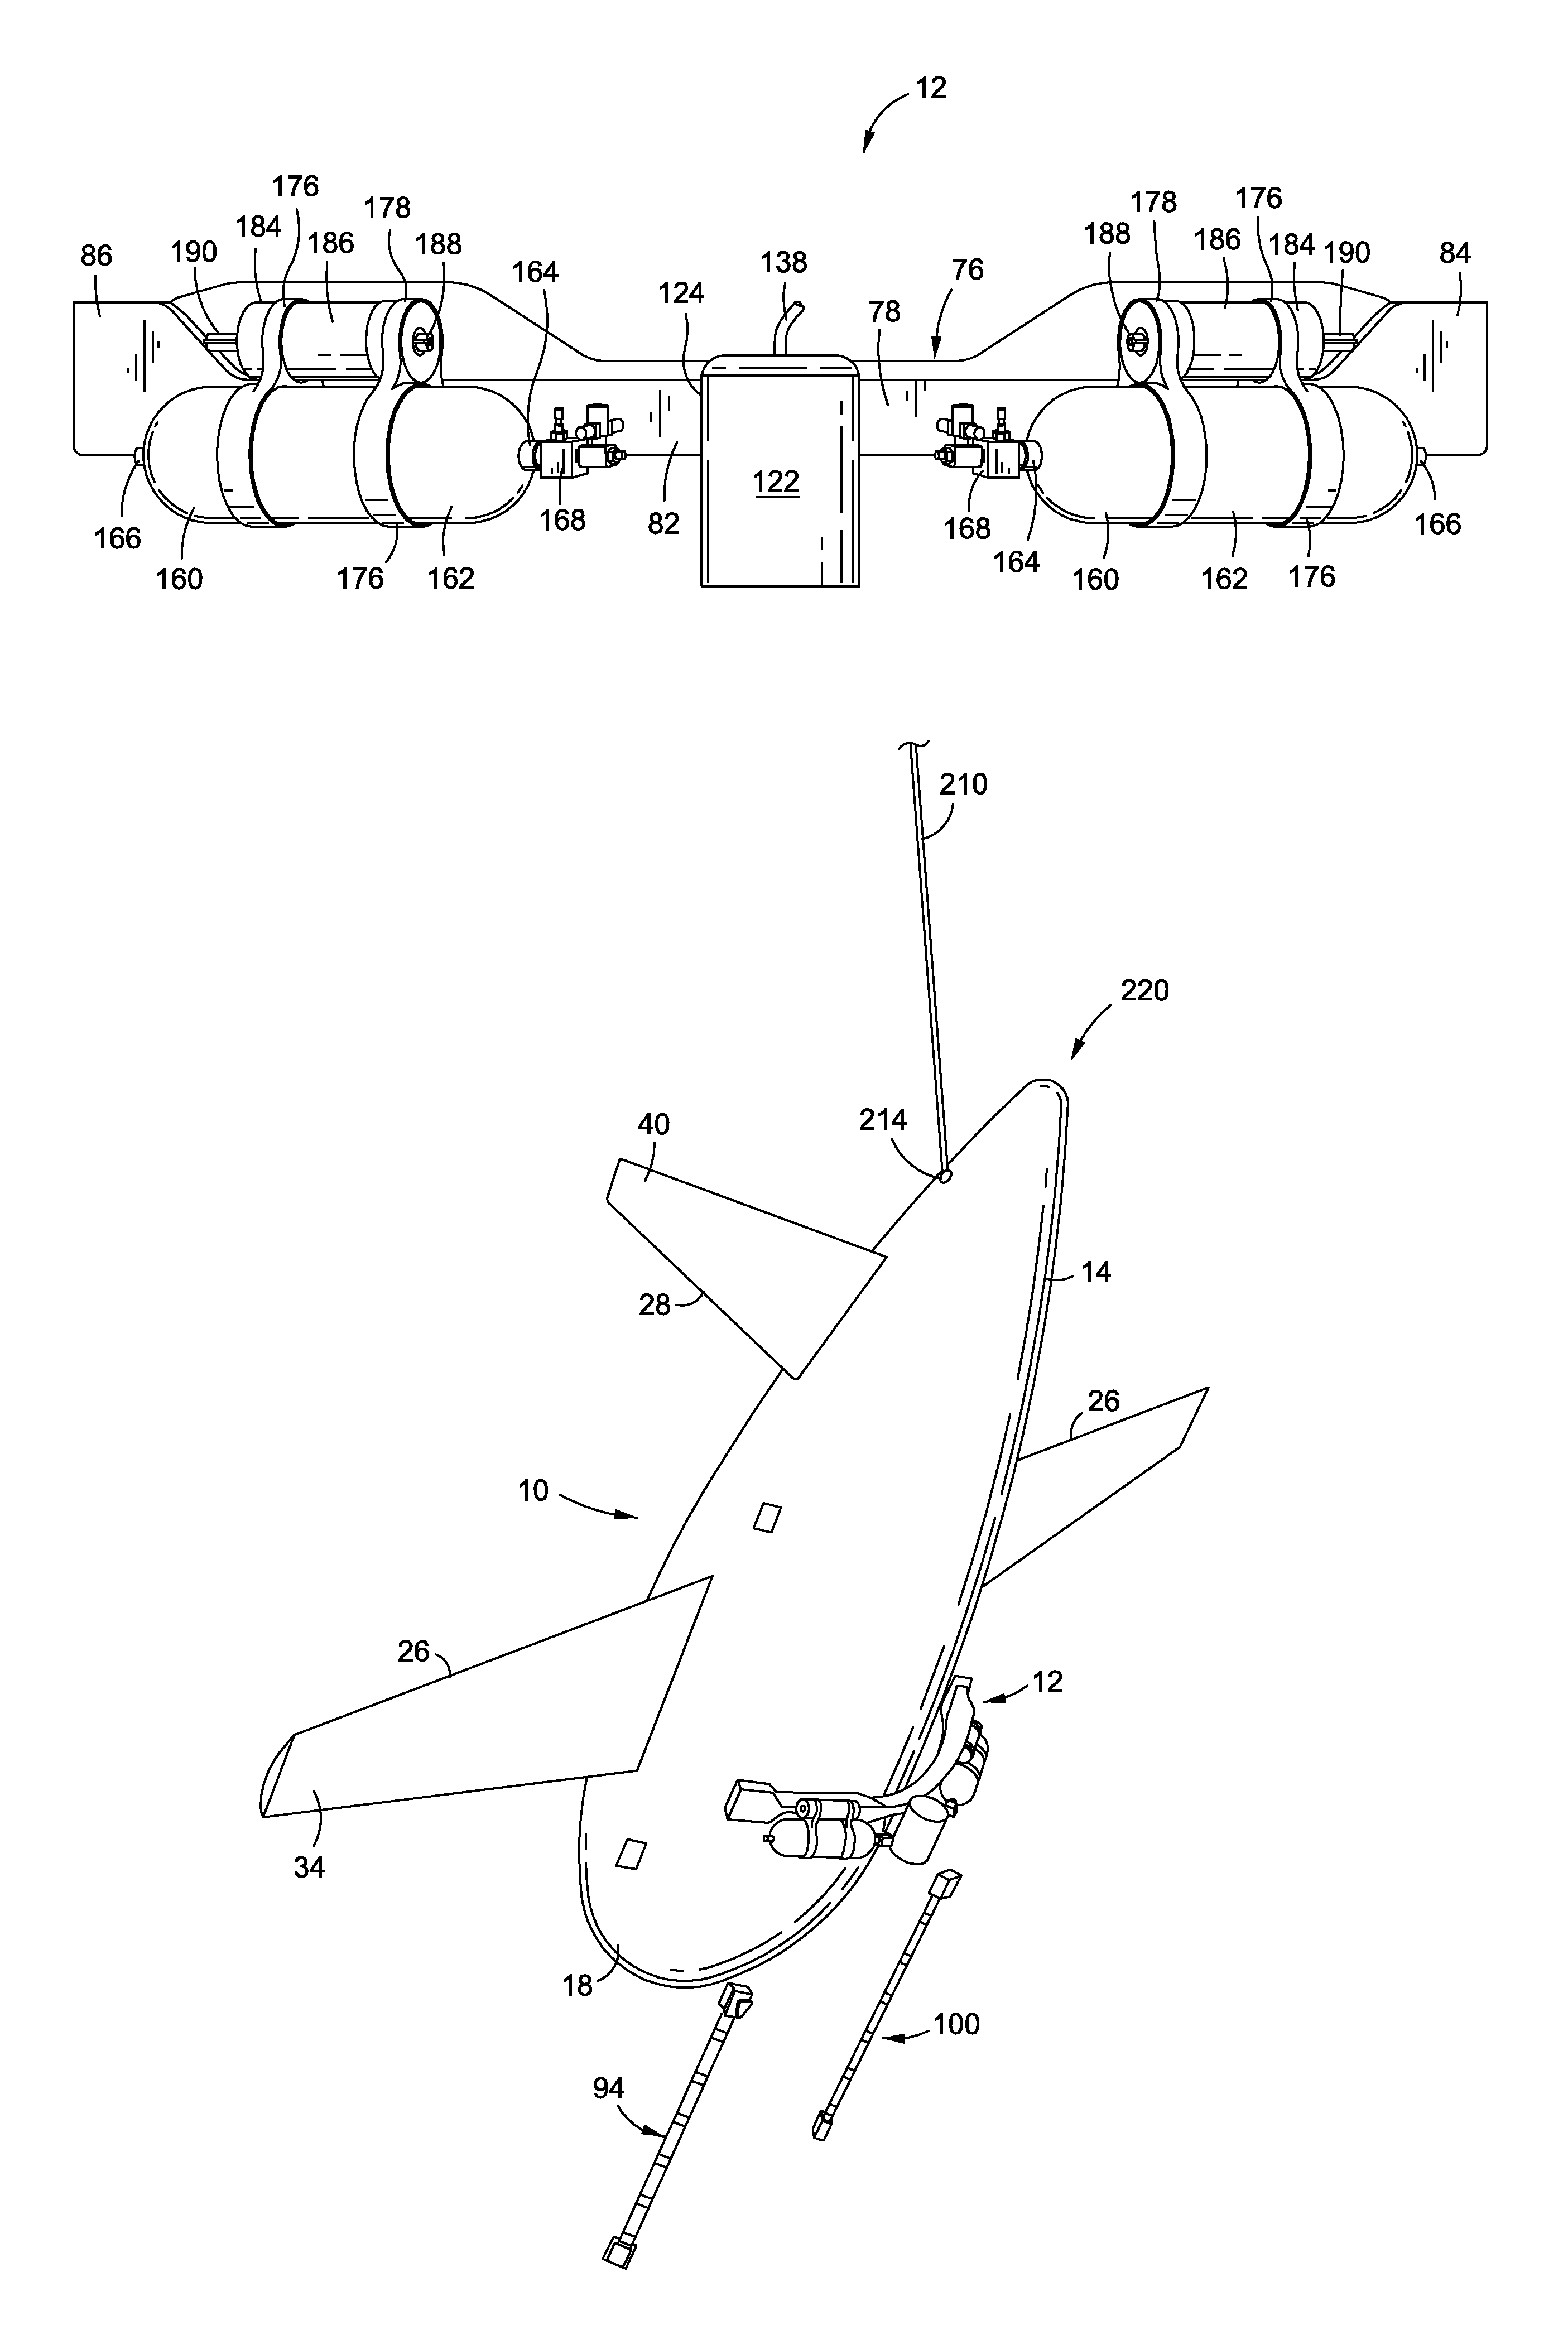 Detachable inflation system for air vehicles